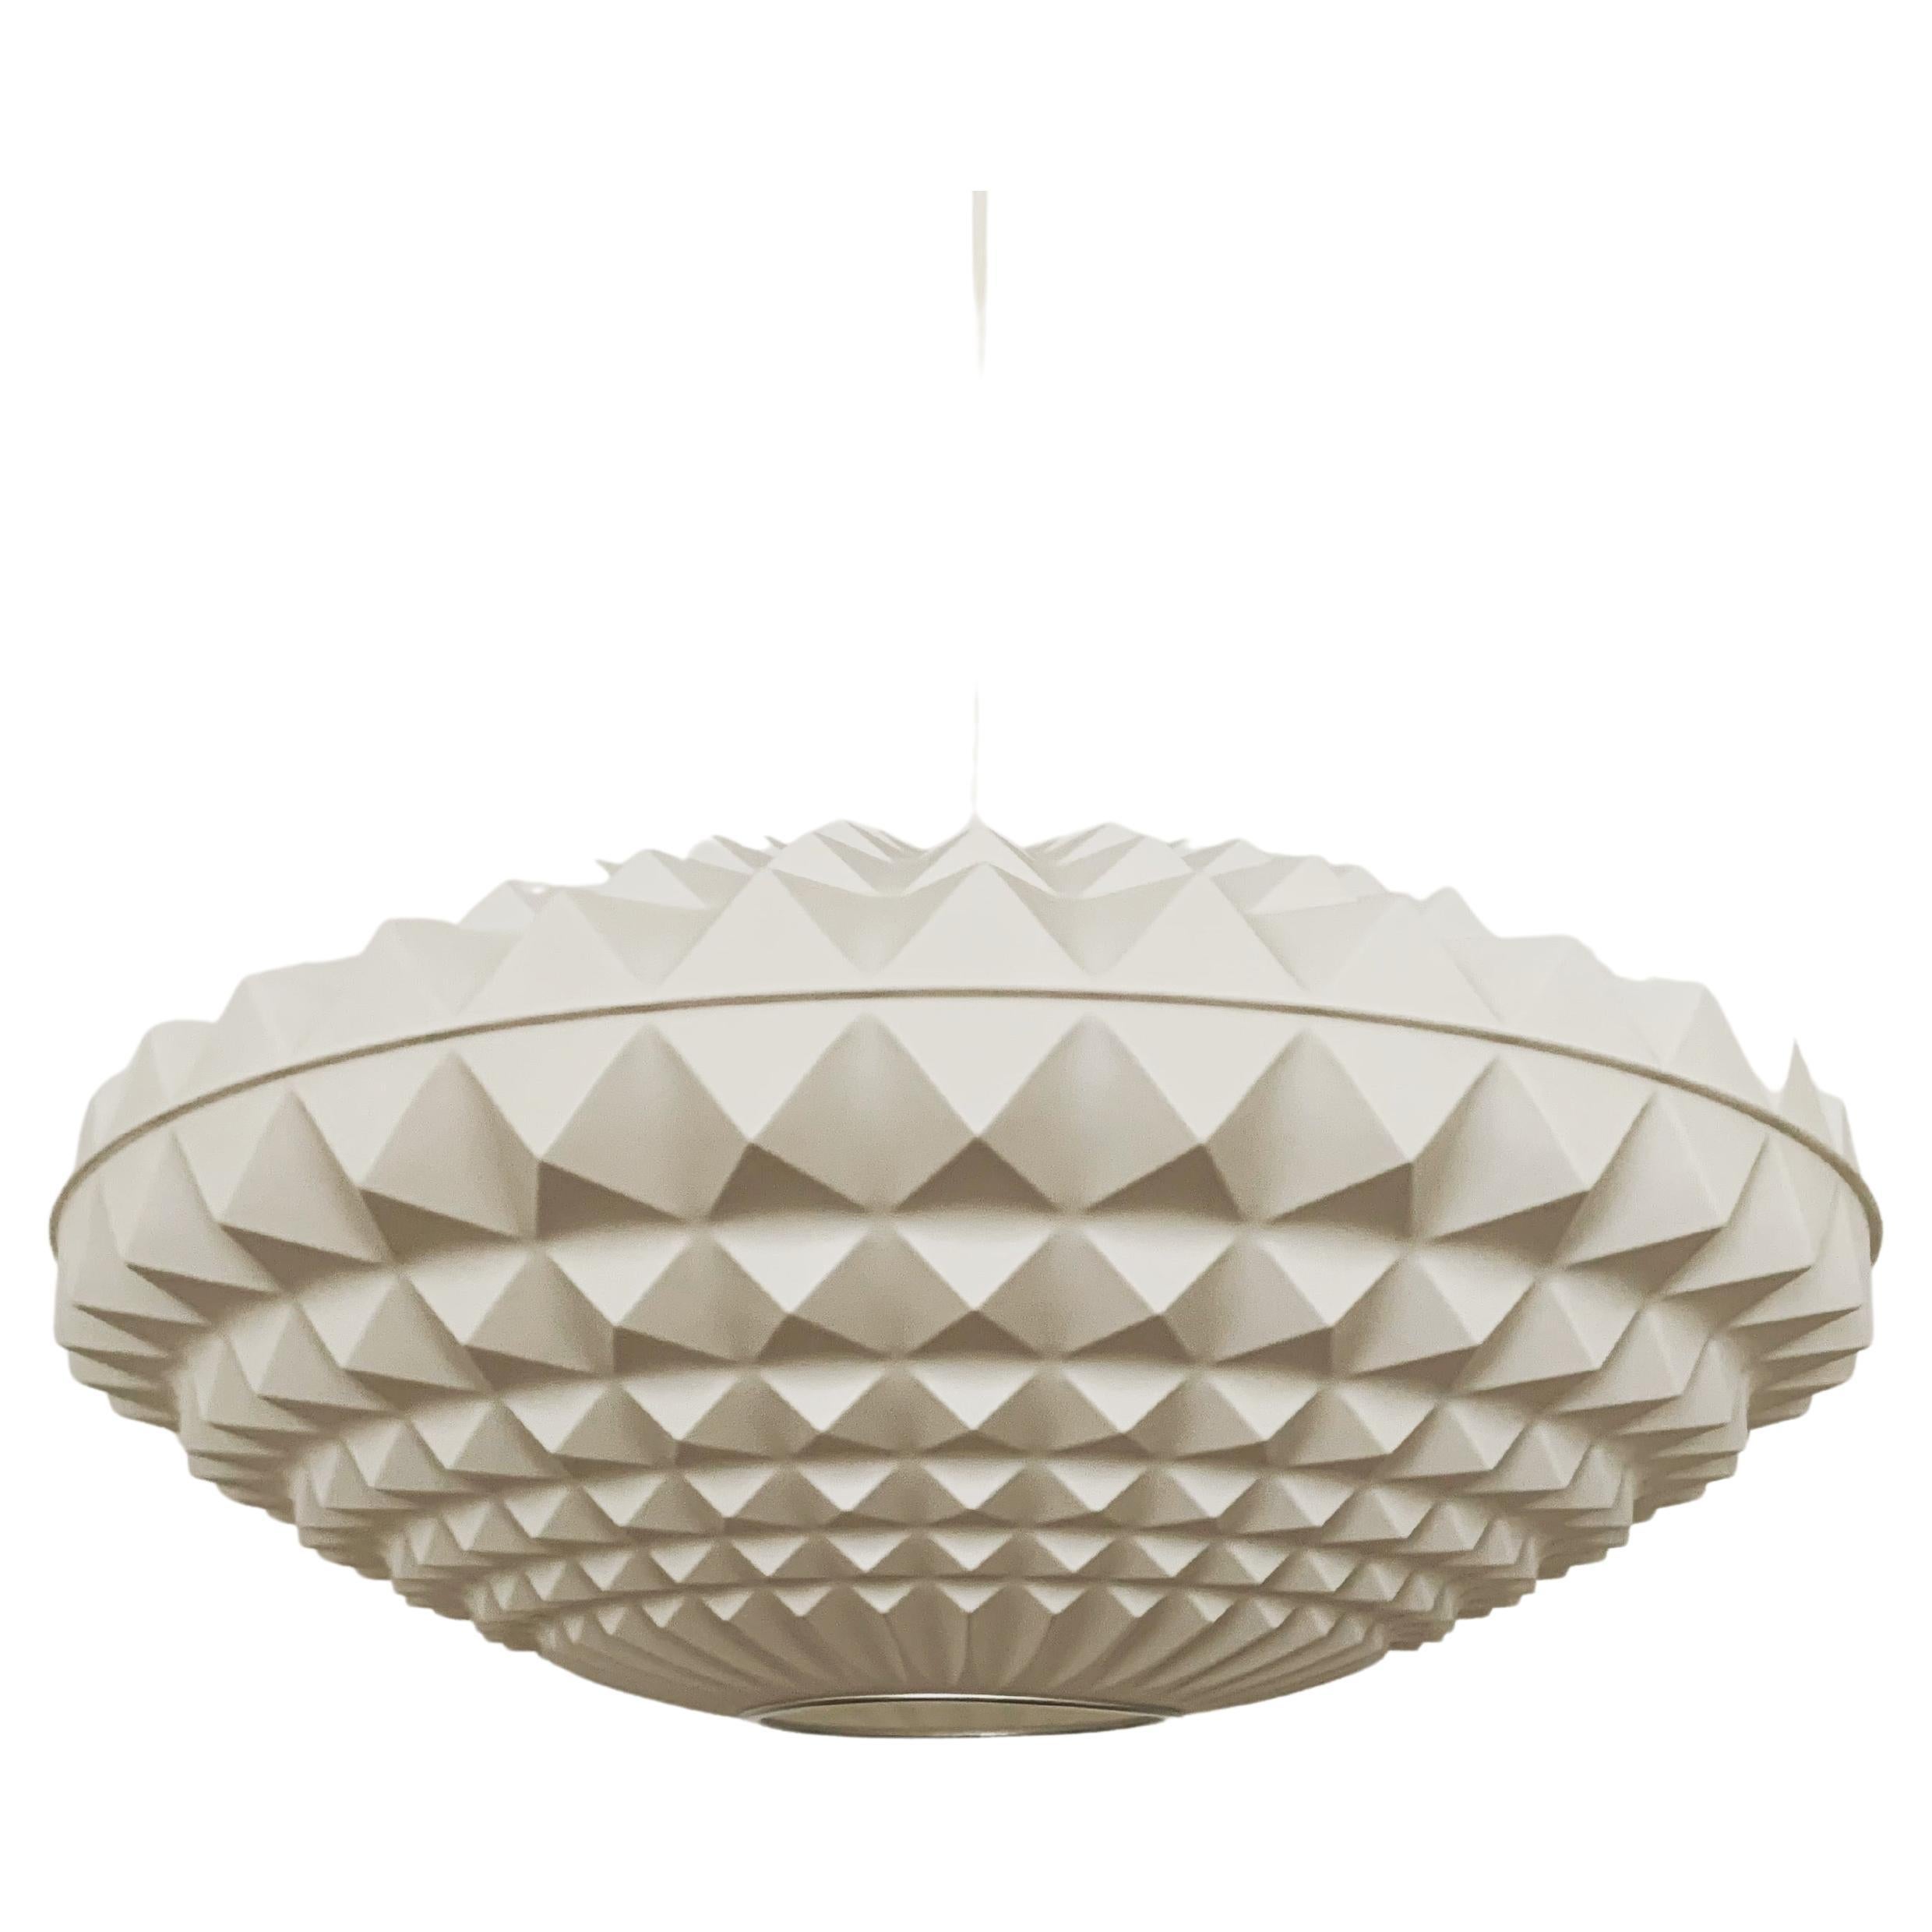 Origami Pendant Lamp by Aloys Gangkofner for Erco For Sale